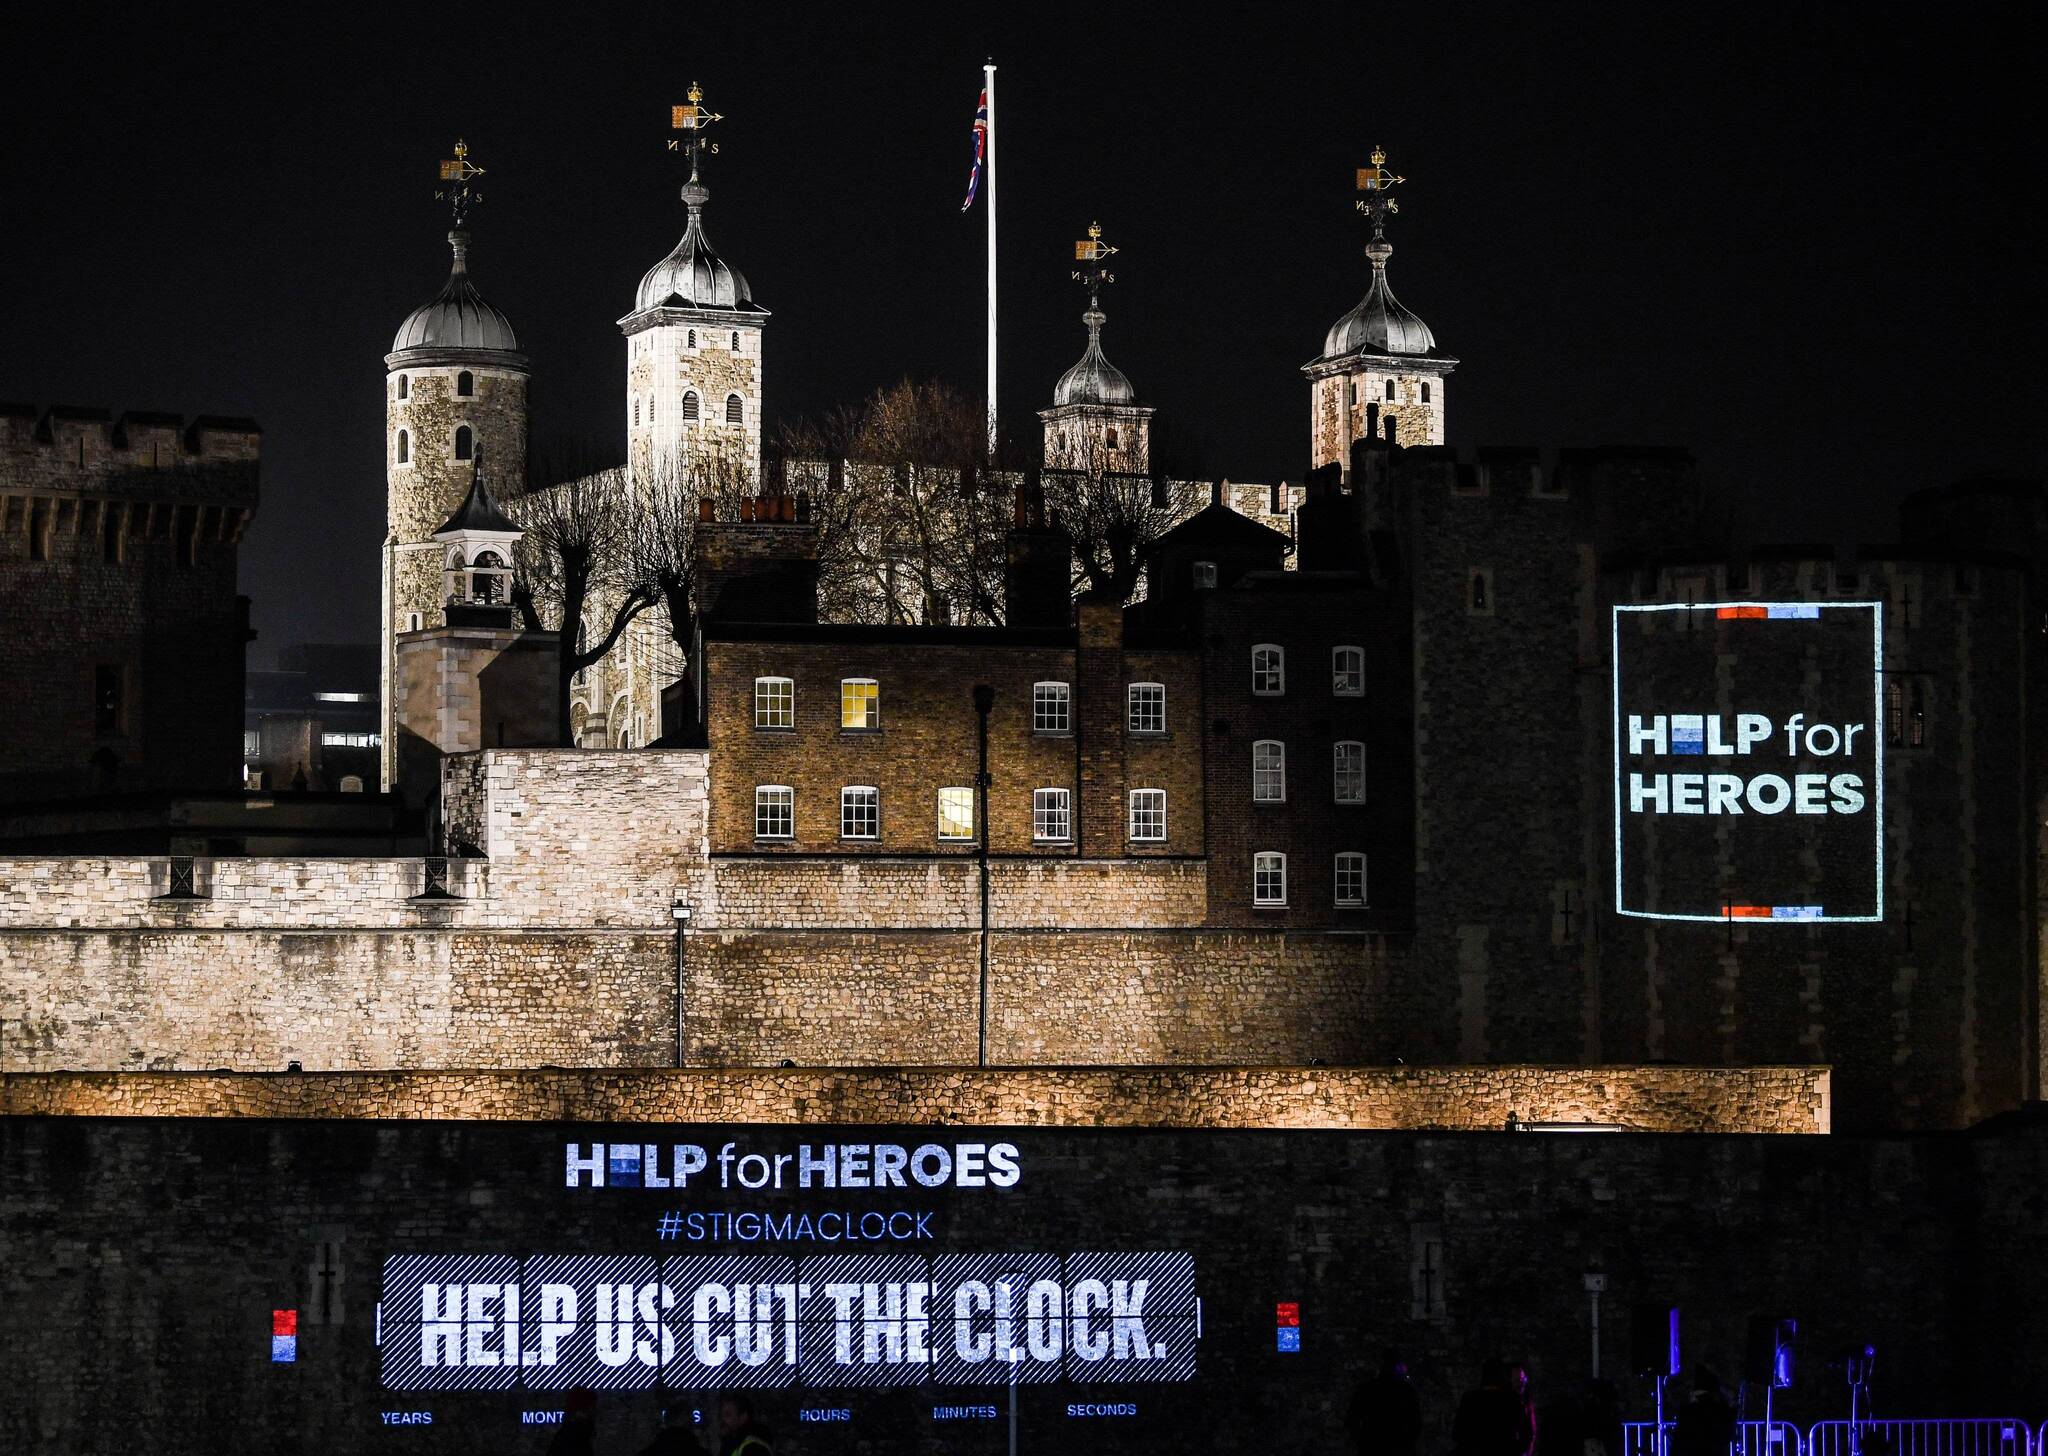 Help For Heroes 'Cut the Clock' logo is projected onto the Tower of London